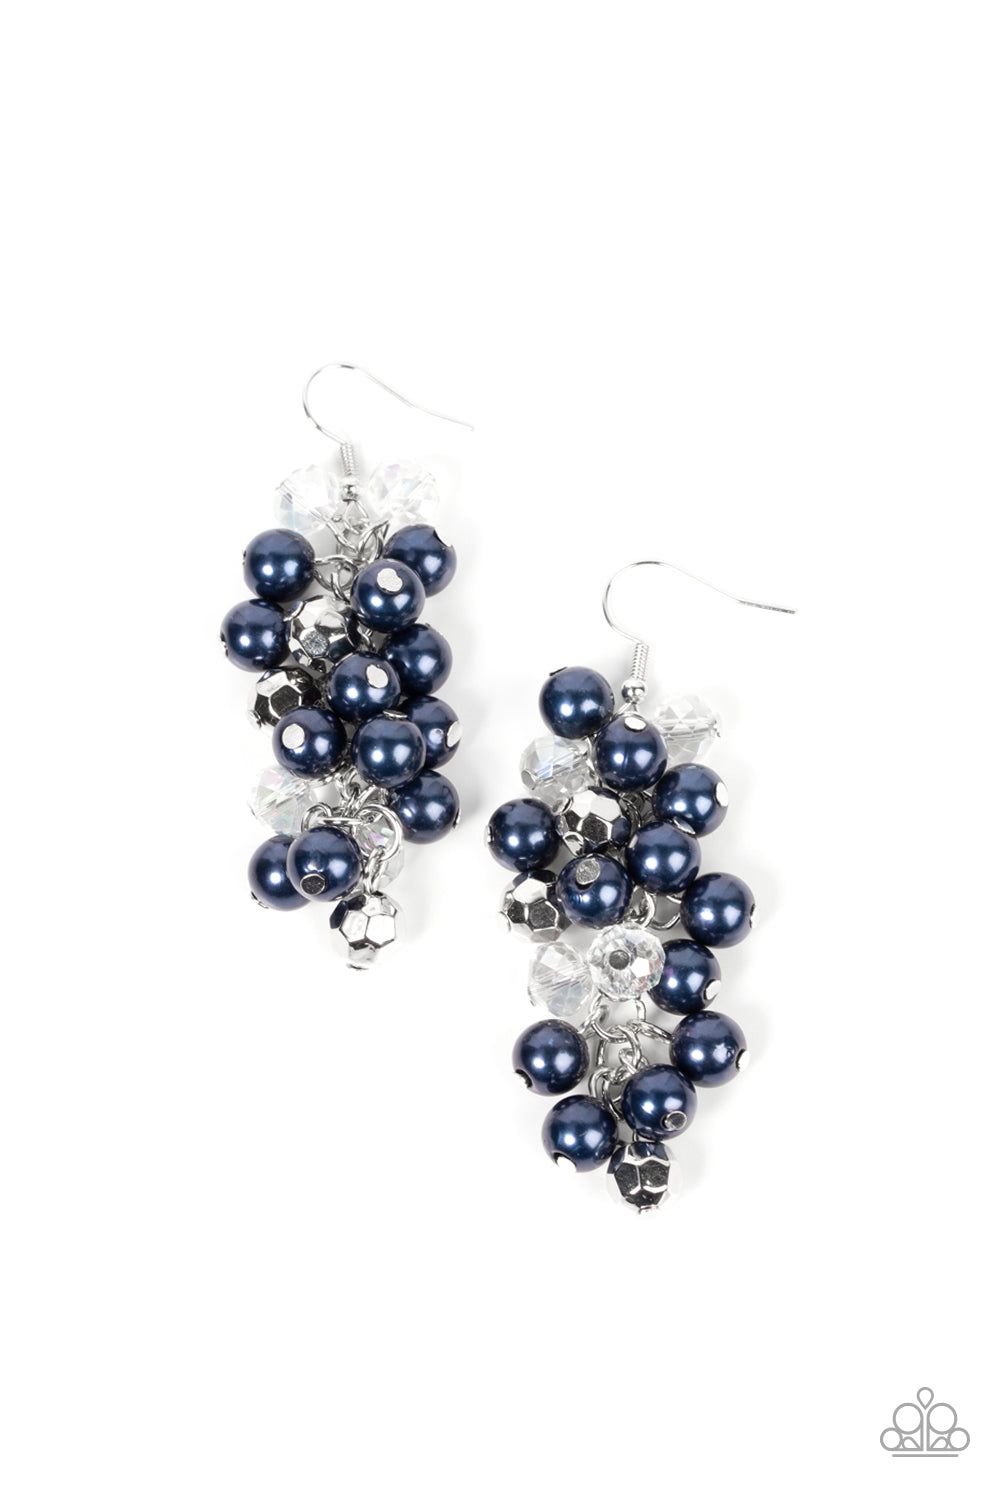 Pursuing Perfection - Blue Pearl Earrings - Paparazzi Jewelry - Bejeweled Accessories By Kristie - A bubbly collection of blue pearls, iridescent white crystal-like accents, and faceted silver beads trickle along a single silver chain, resulting in a chicly clustered chandelier. Earring attaches to a standard fishhook fitting. Sold as one pair of earrings.